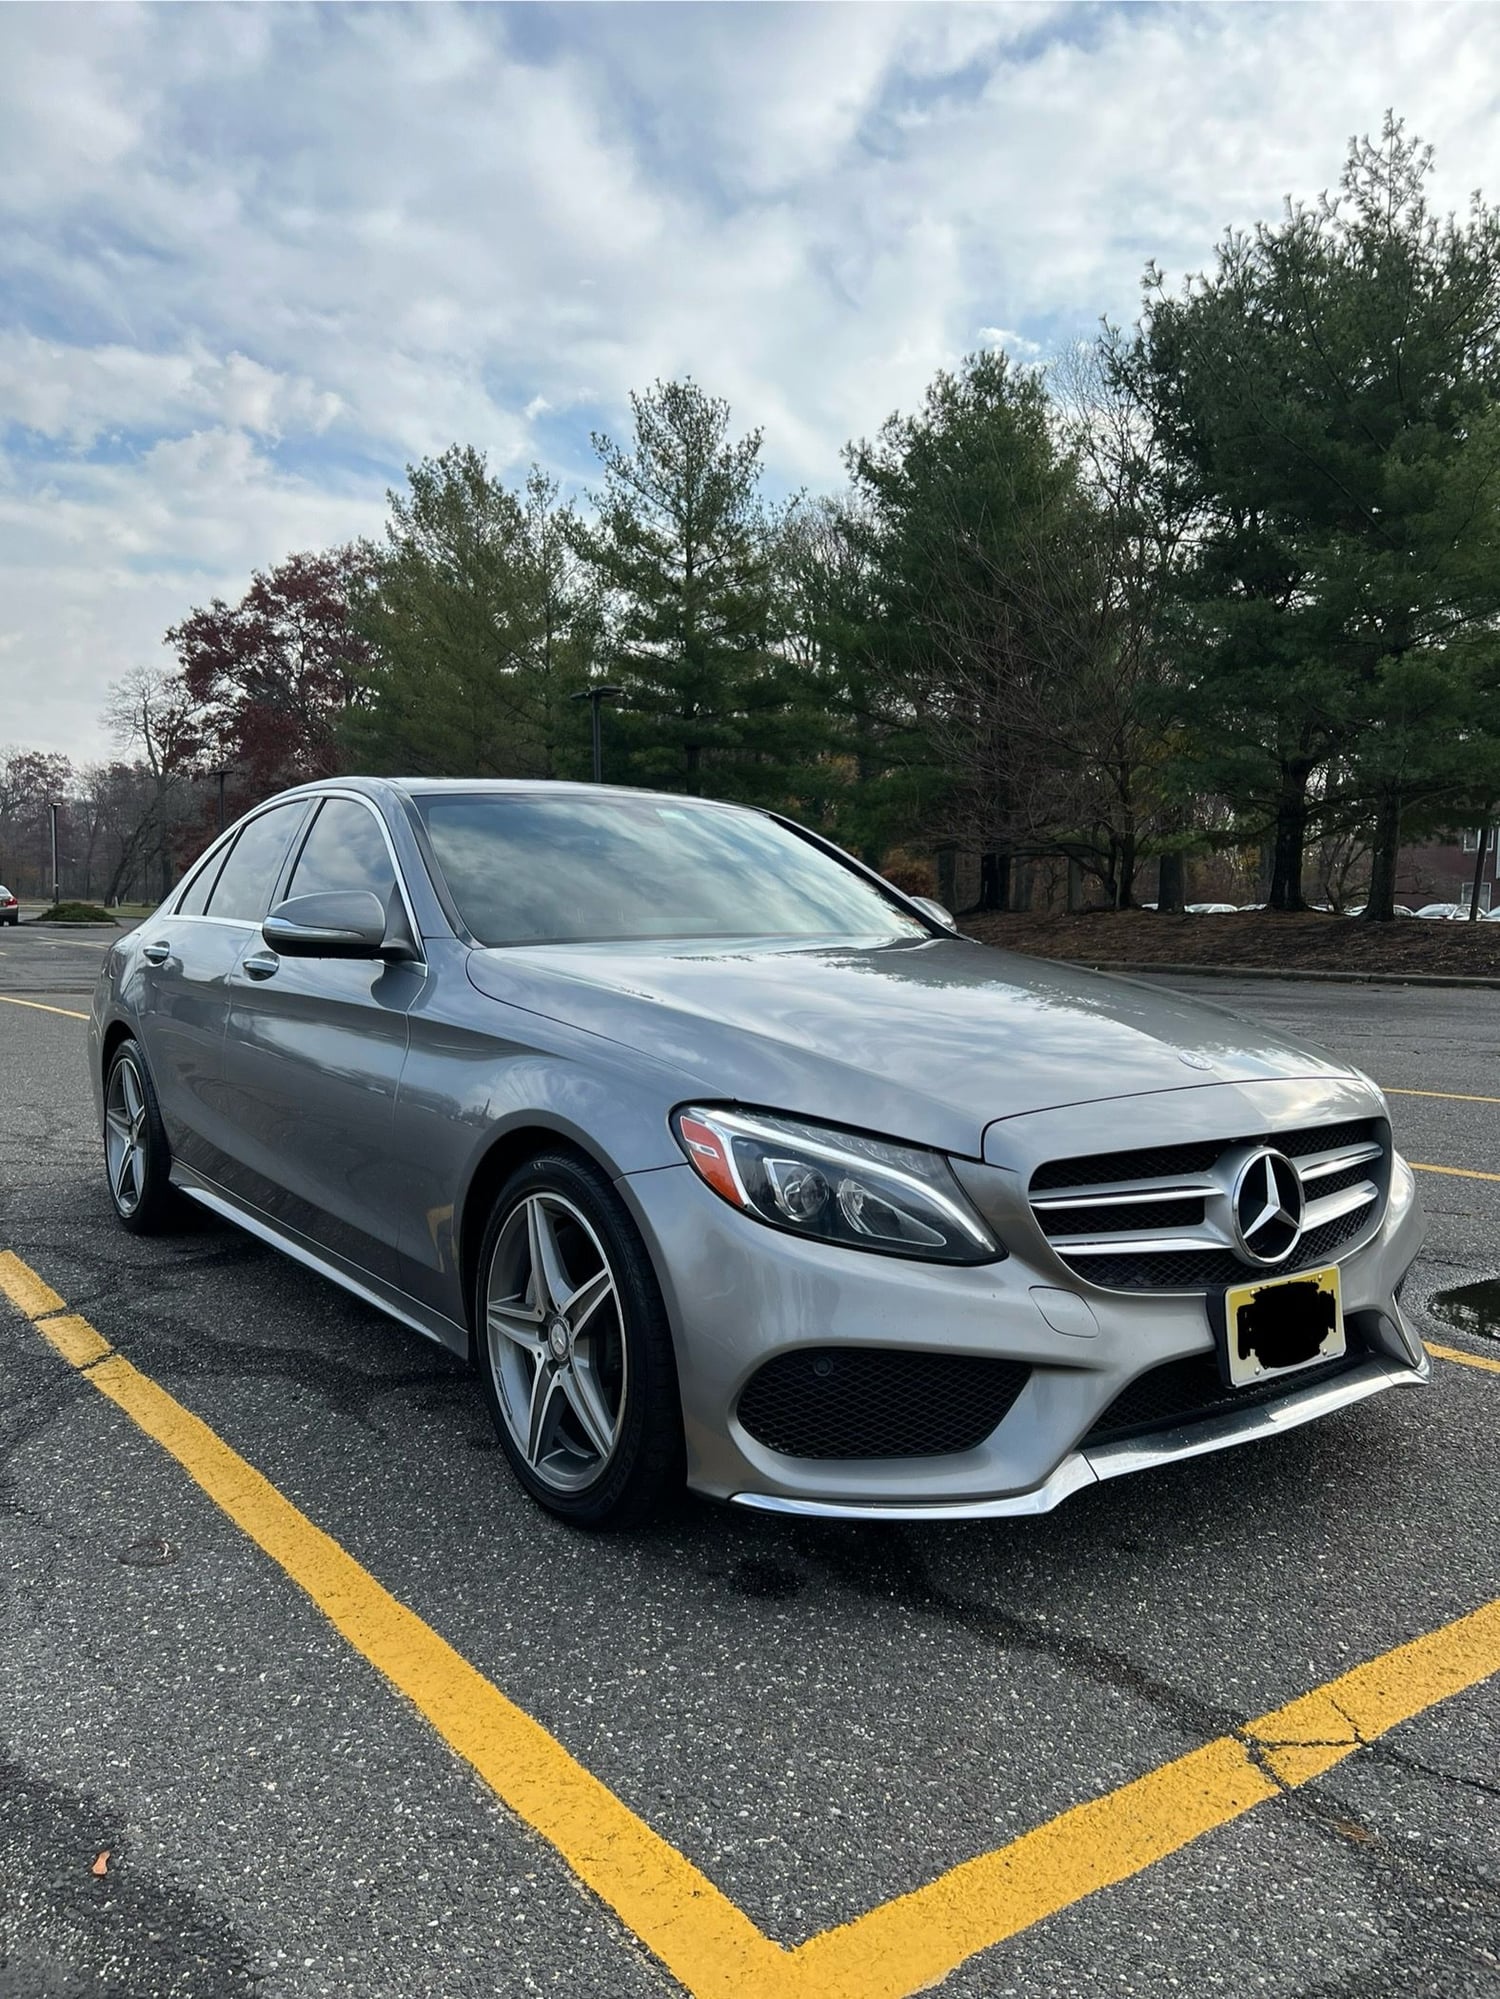 2015 Mercedes-Benz C300 - 2015 Mercedes C300 4Matic - Used - VIN FU086377 - 103,000 Miles - 4 cyl - 4WD - Automatic - Sedan - Gray - Kendall Park, NJ 08224, United States